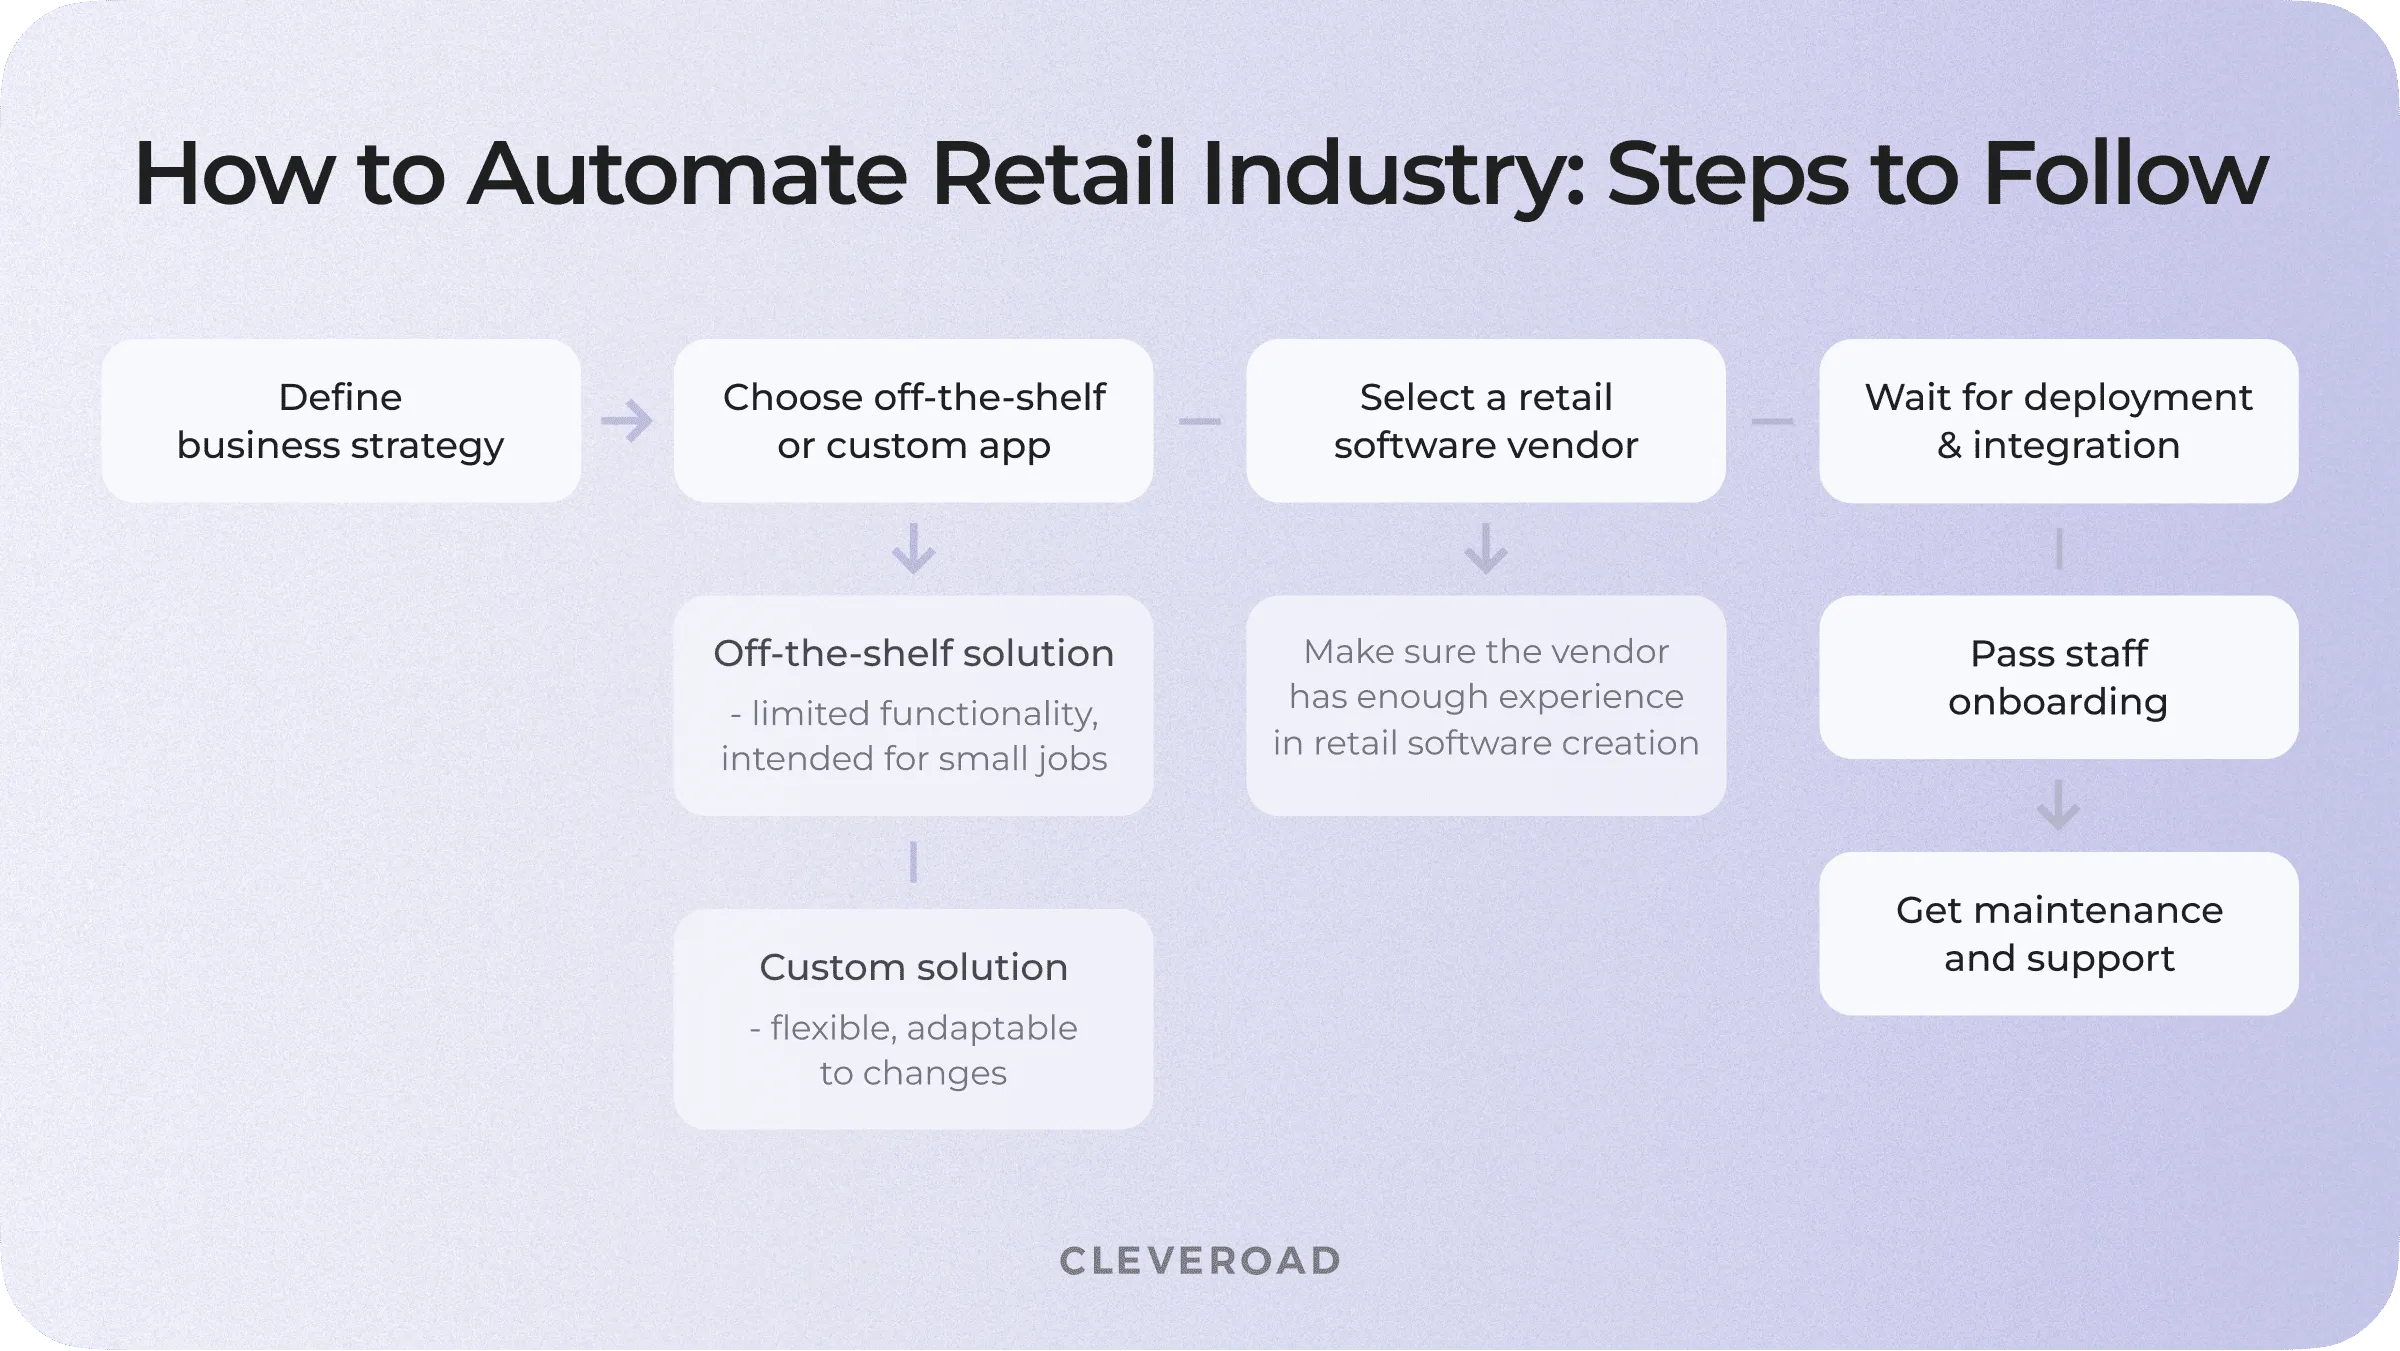 How to turn retail automation concept into reality: steps to pass